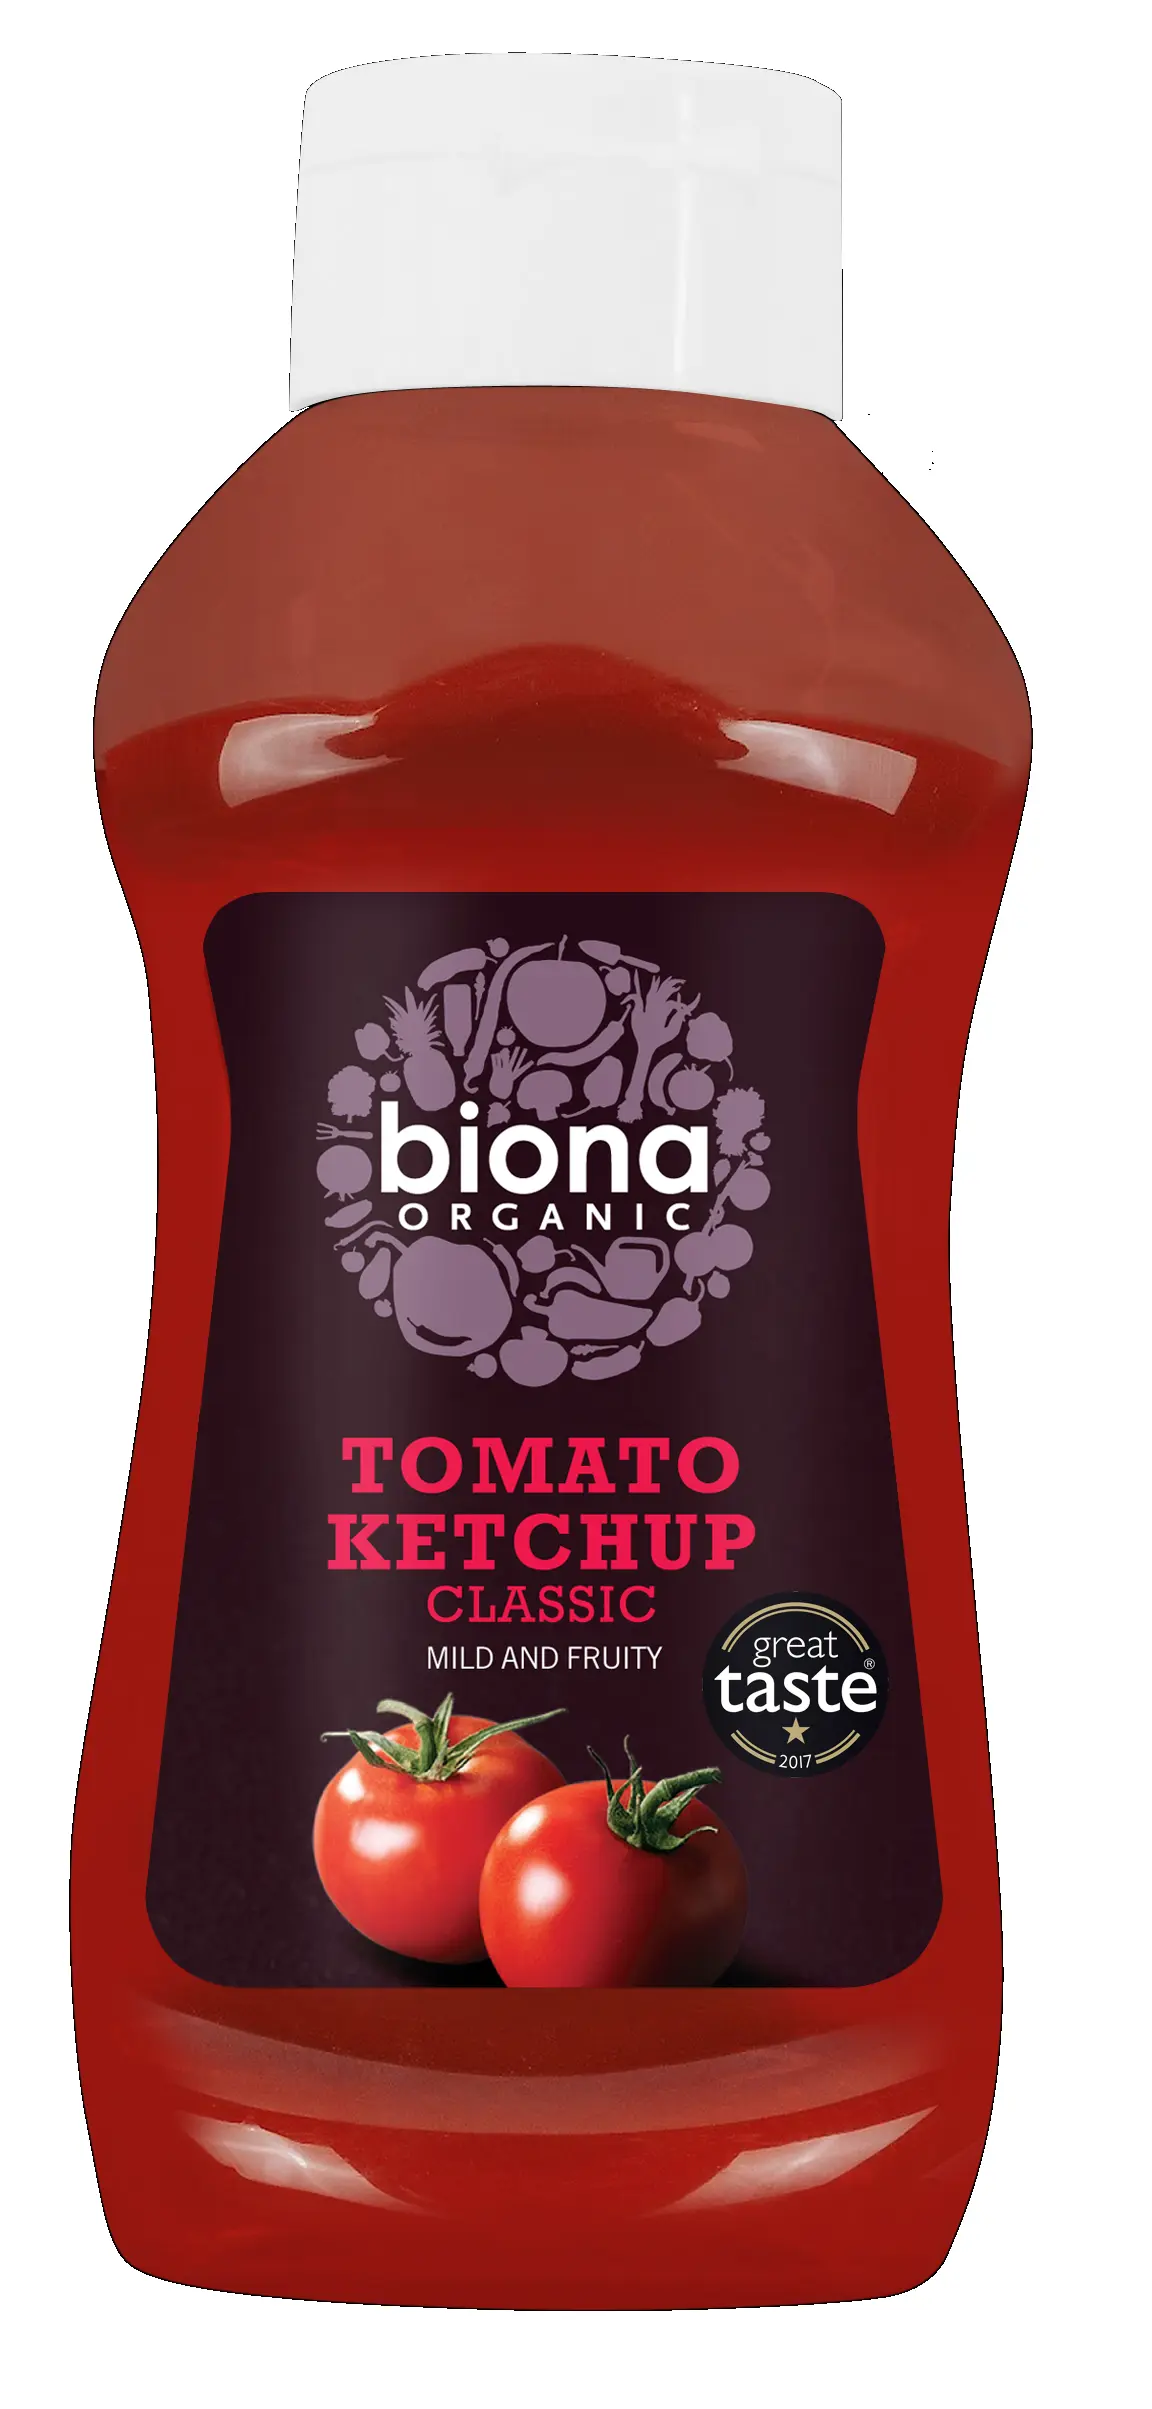 Biona Tomato Ketchup organic squeezy bottle 560g